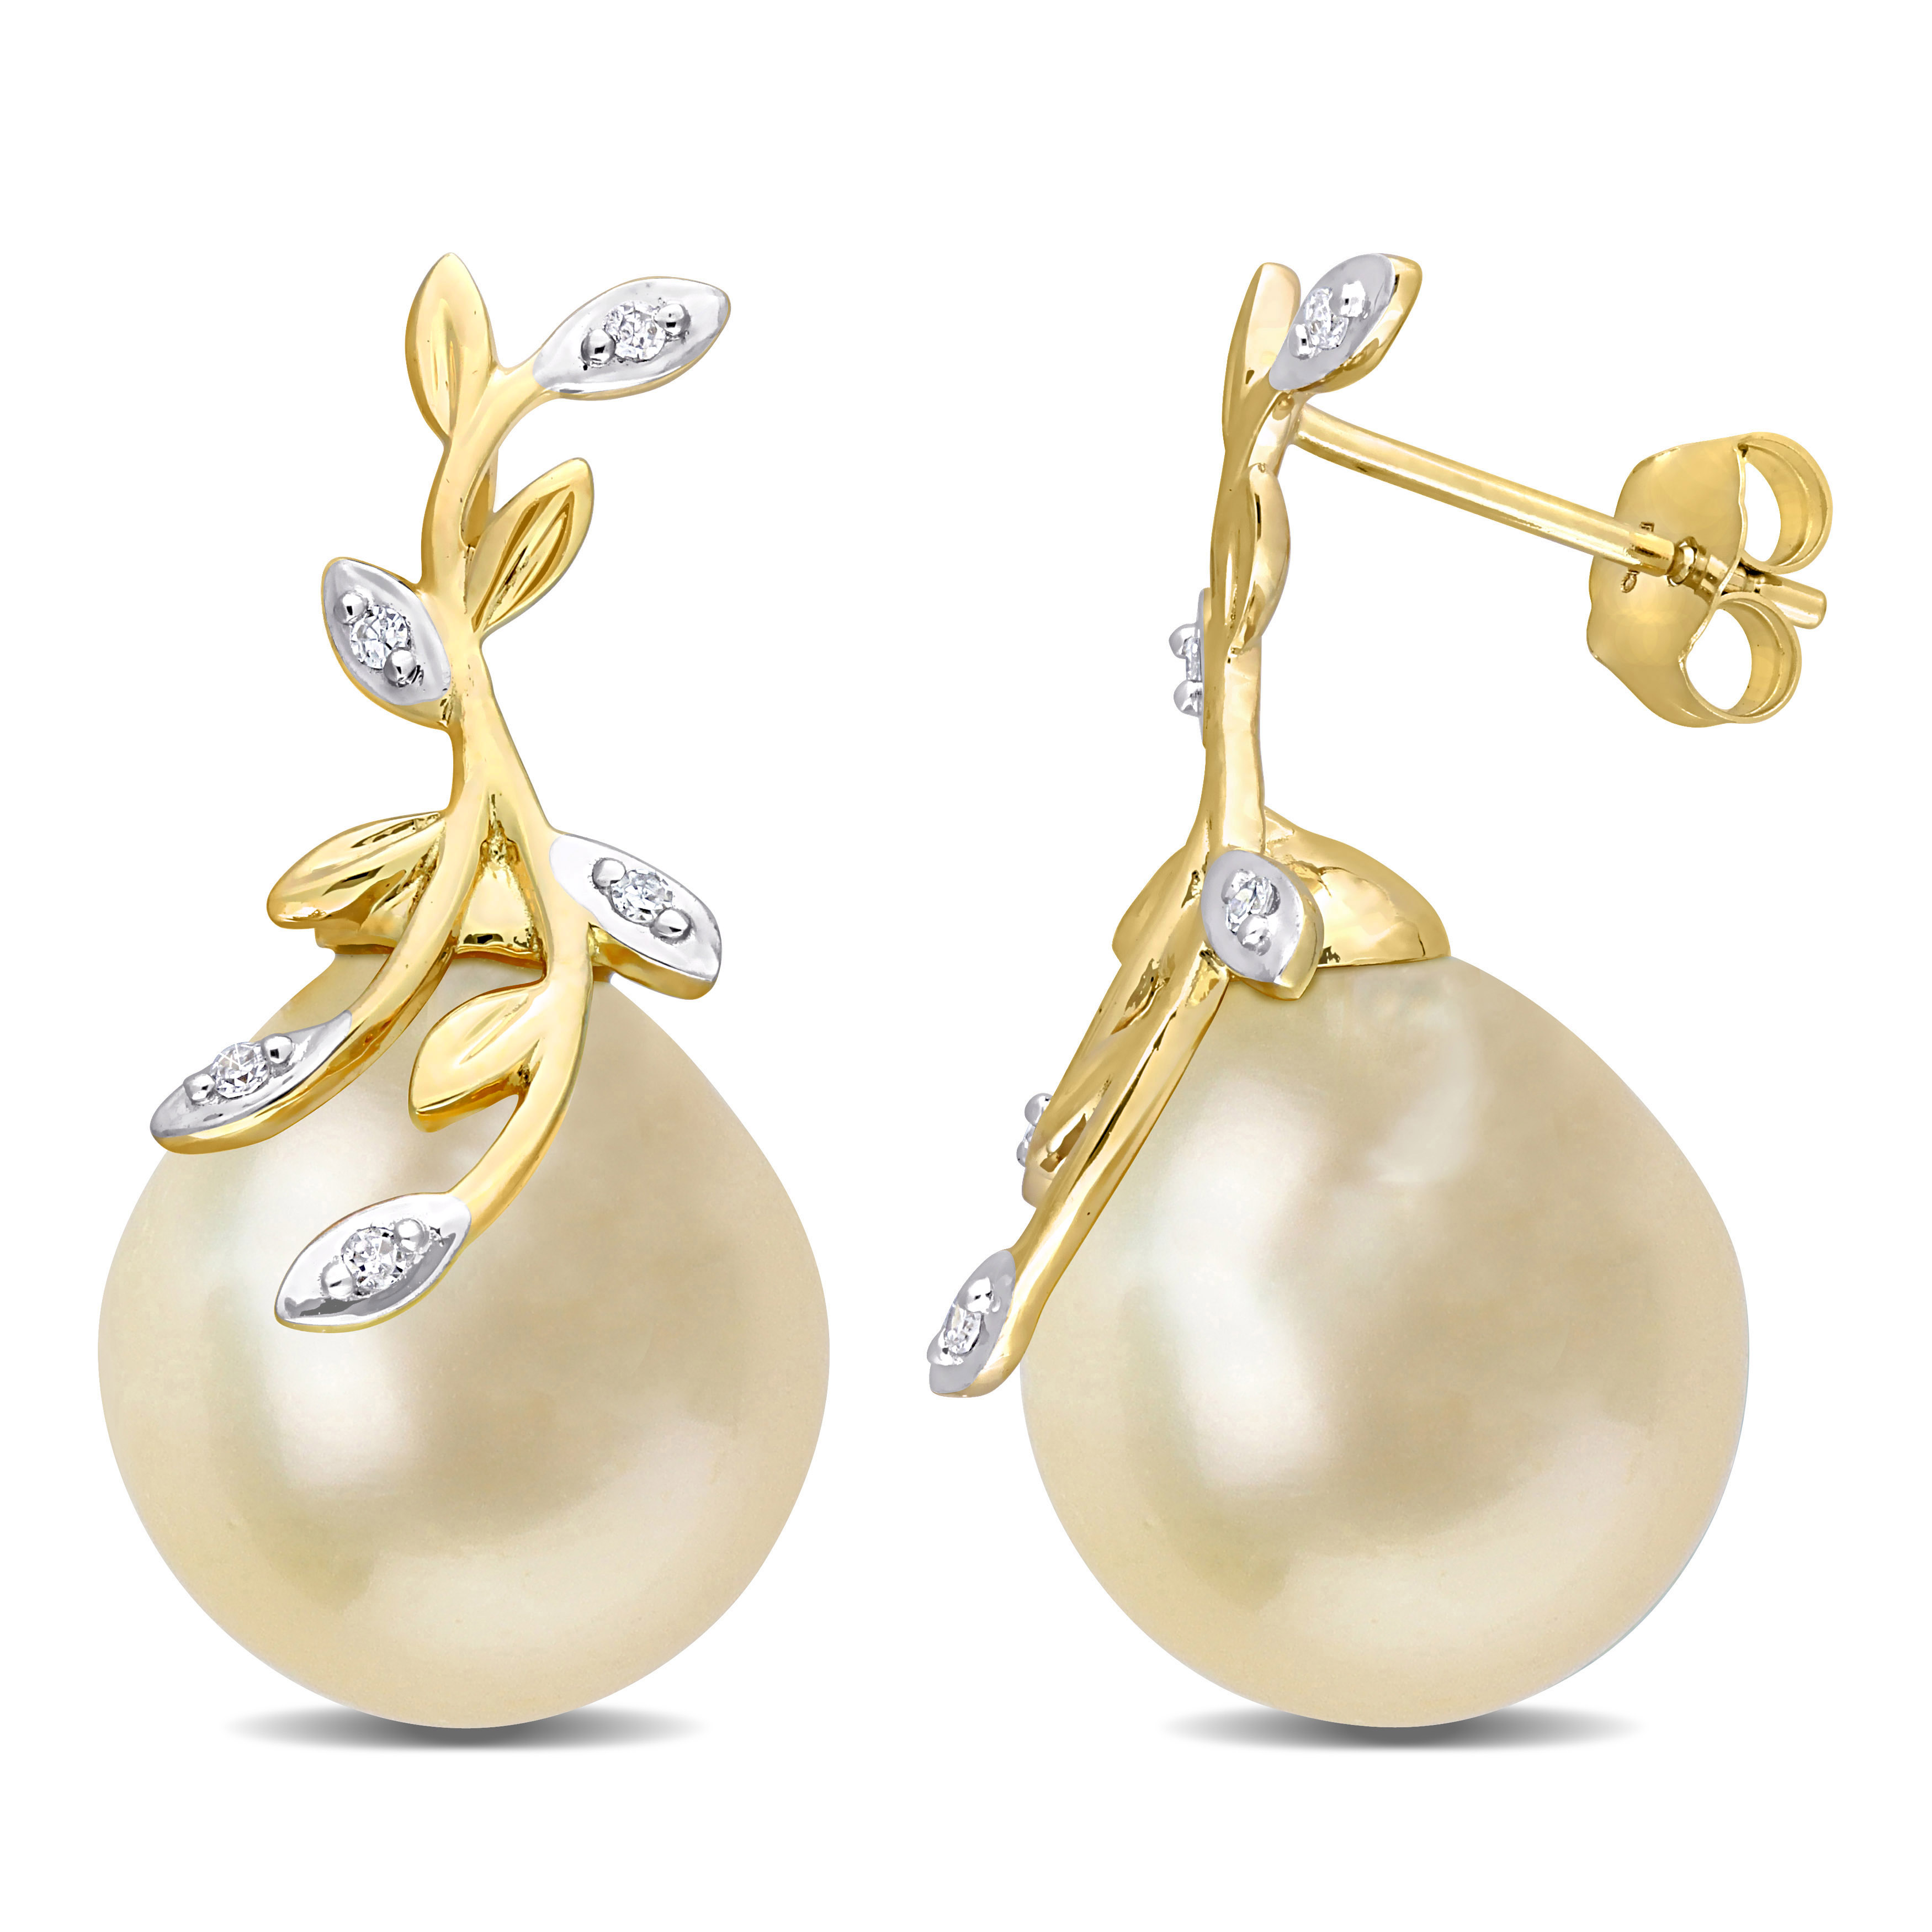 12-12.5 MM Golden Sea Cultured Pearl & Diamond-Accent Leaf Design Earrings in 14k Yellow Gold